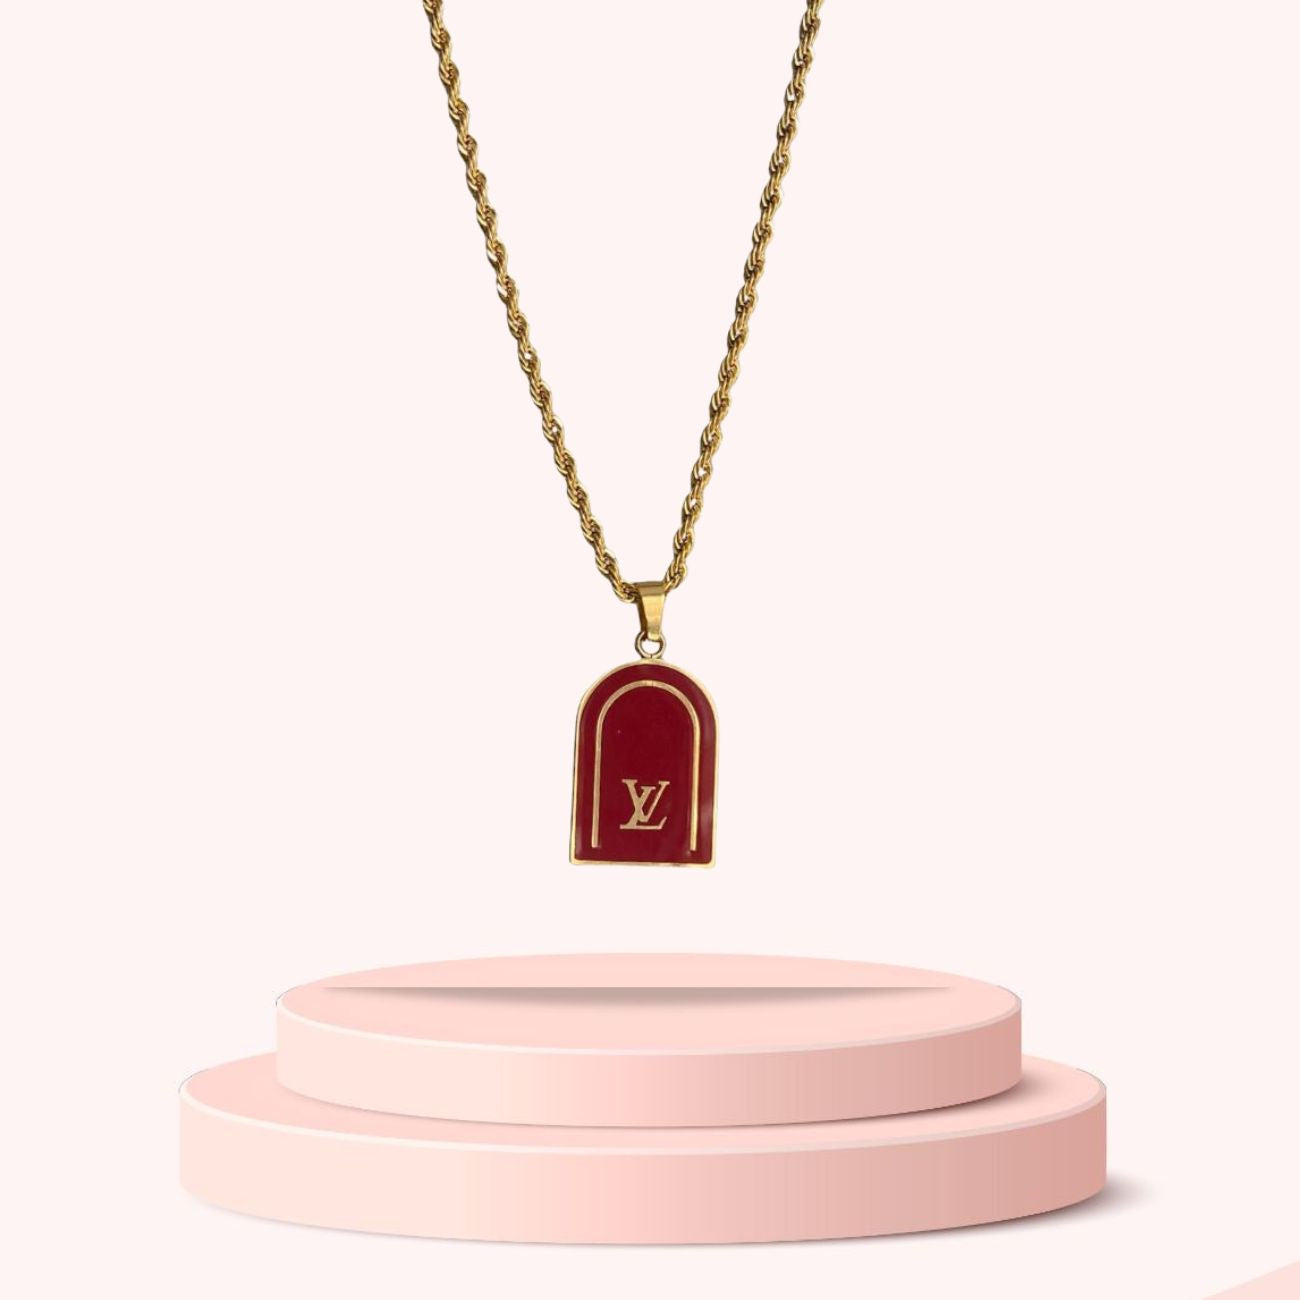 Lv Luggage Tag Necklace For Women